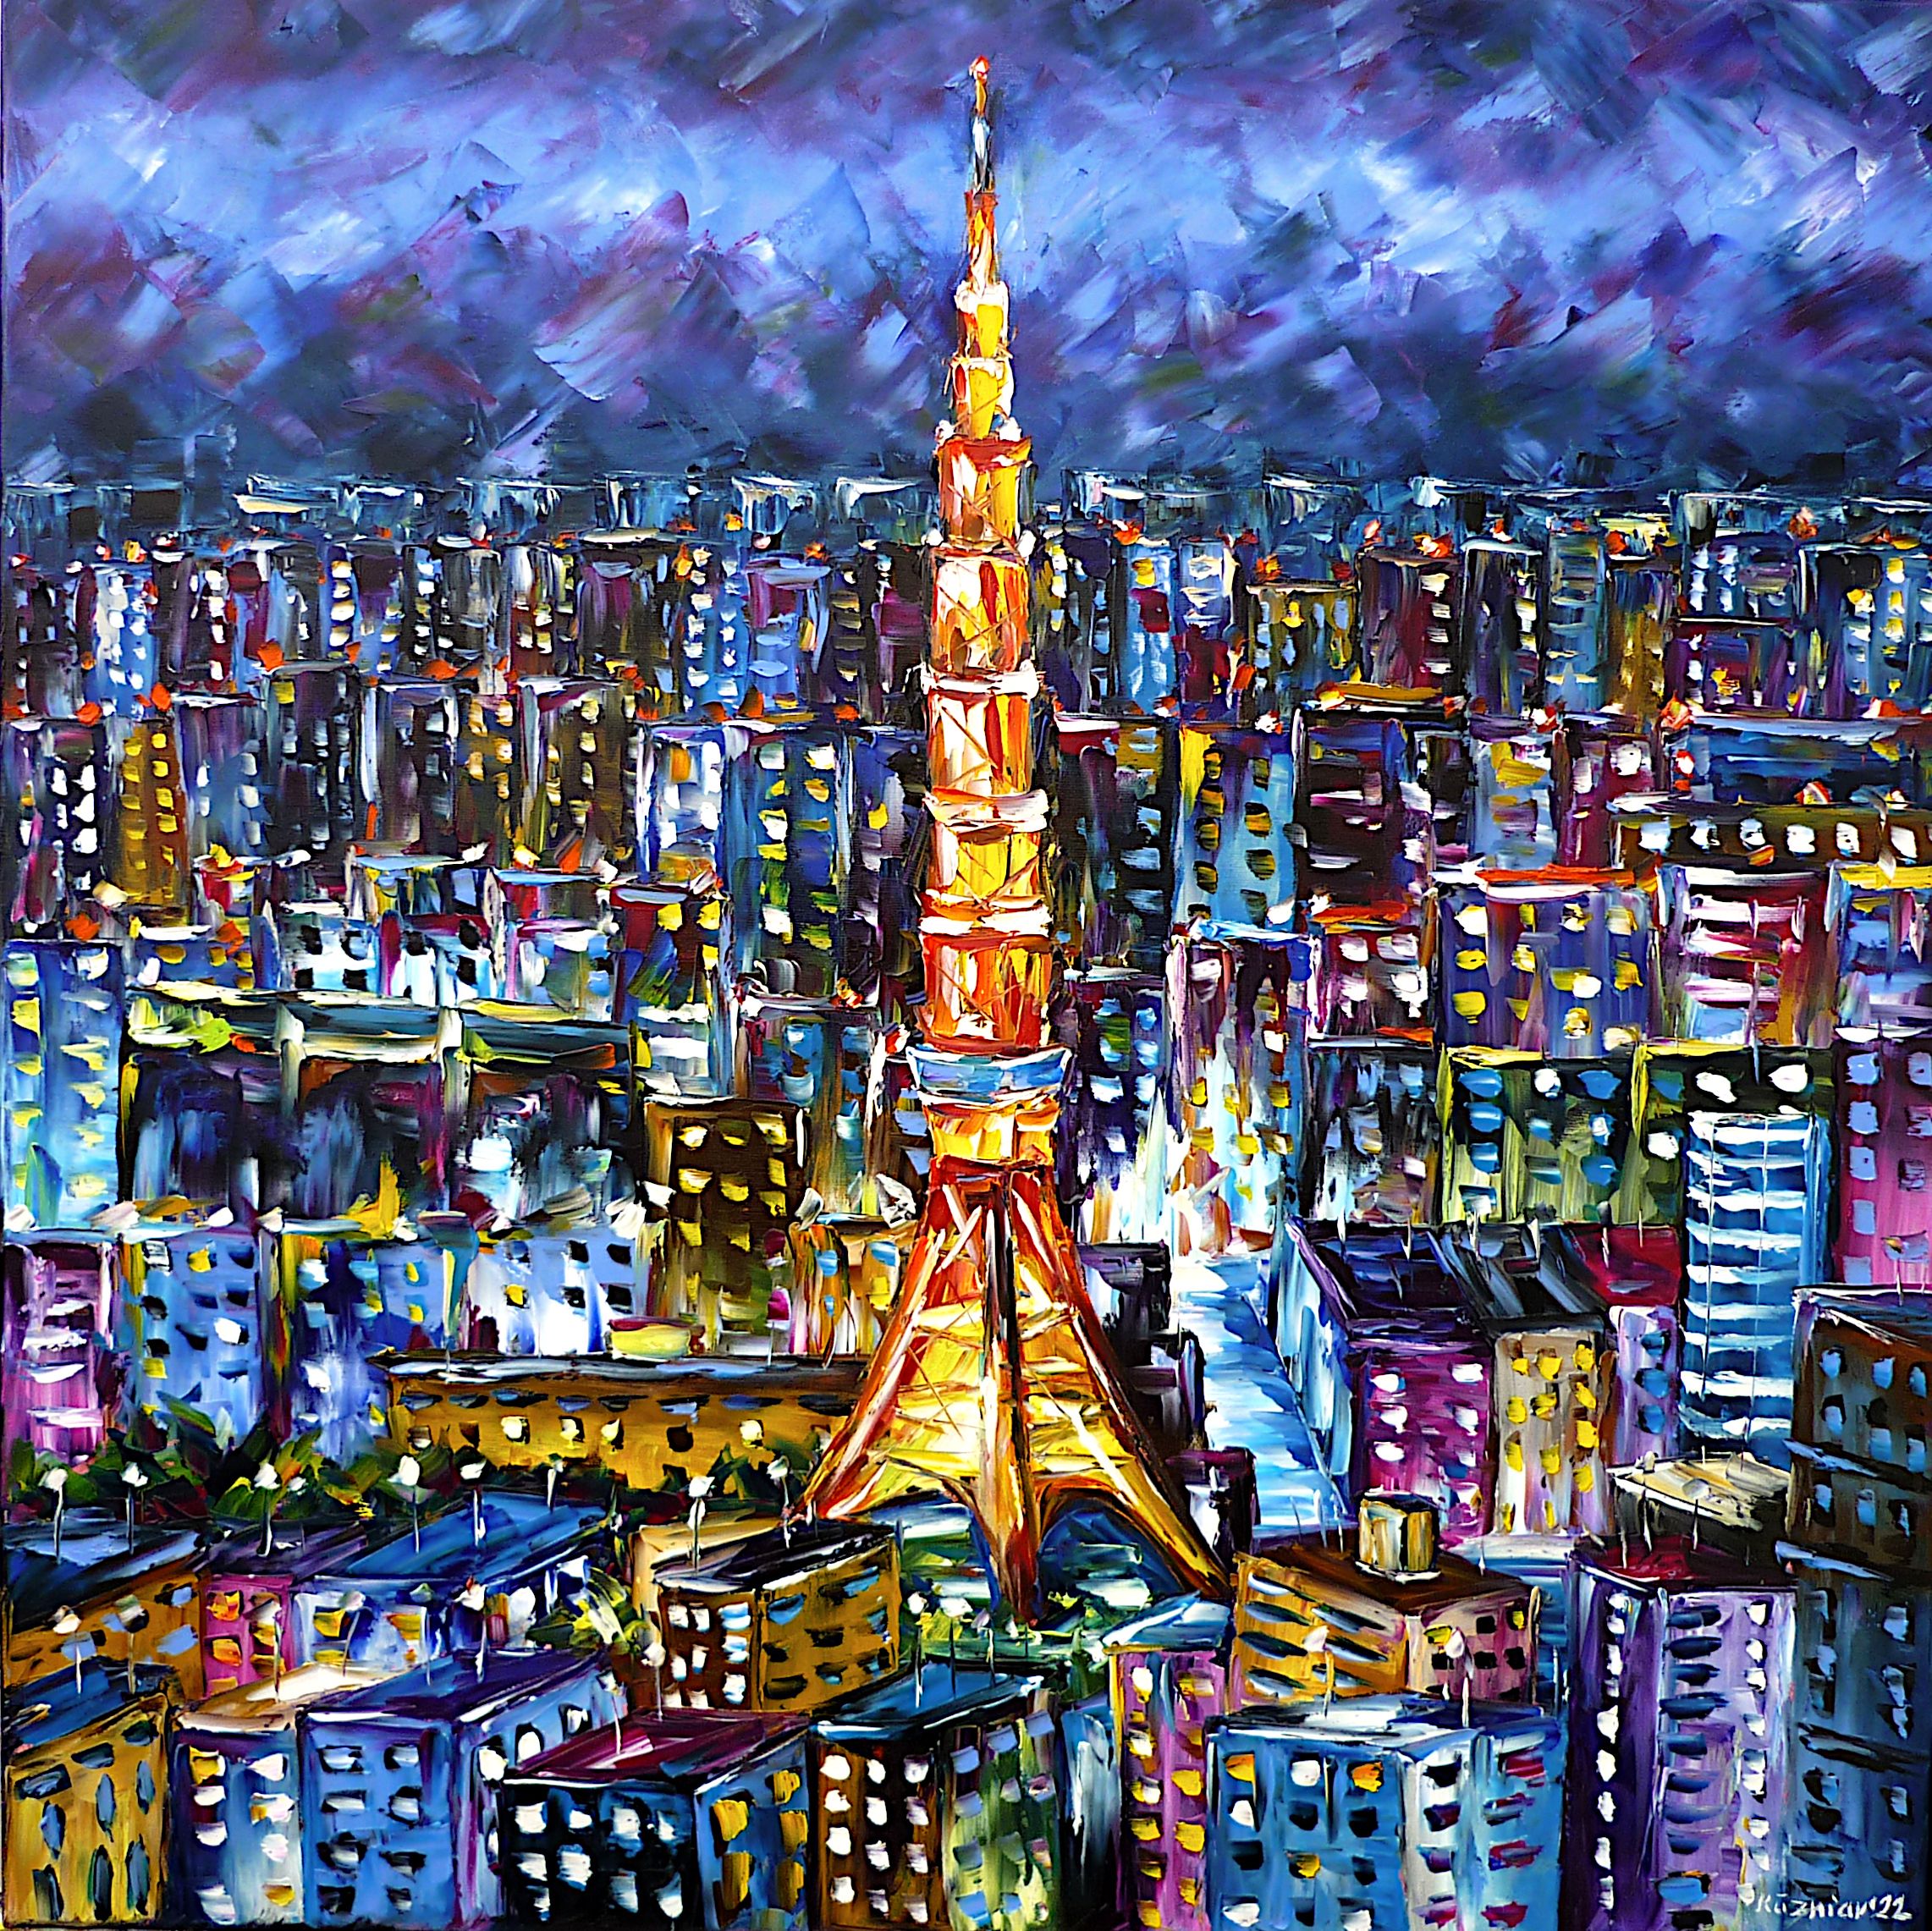 tokyo at night,shining tokyo,shining tokyo night,shining city lights,shining tokyo lights,luminous tower,tokyo lights,tokyo luminous,night lights,night sky,tokyo night,city at night,luminous city,luminous houses,city lights,night painting,night picture,abstract night,night light,tokyo skyline,tokyo from above,tokyo tower,tokyo cityscape,houses of tokyo,tokyo skyscrapers,tokyo colorful,tokyo abstract,tokyo city,tokyo painting,tokyo picture,tokyo tv tower,tokyo love,tokyo lovers,i love tokyo,japan,sky over the city,square format,square picture,square painting,palette knife oil painting,modern art,modern painting,impressionism,abstract painting,lively colors,colorful painting,bright colors,light reflections,impasto painting,figurative